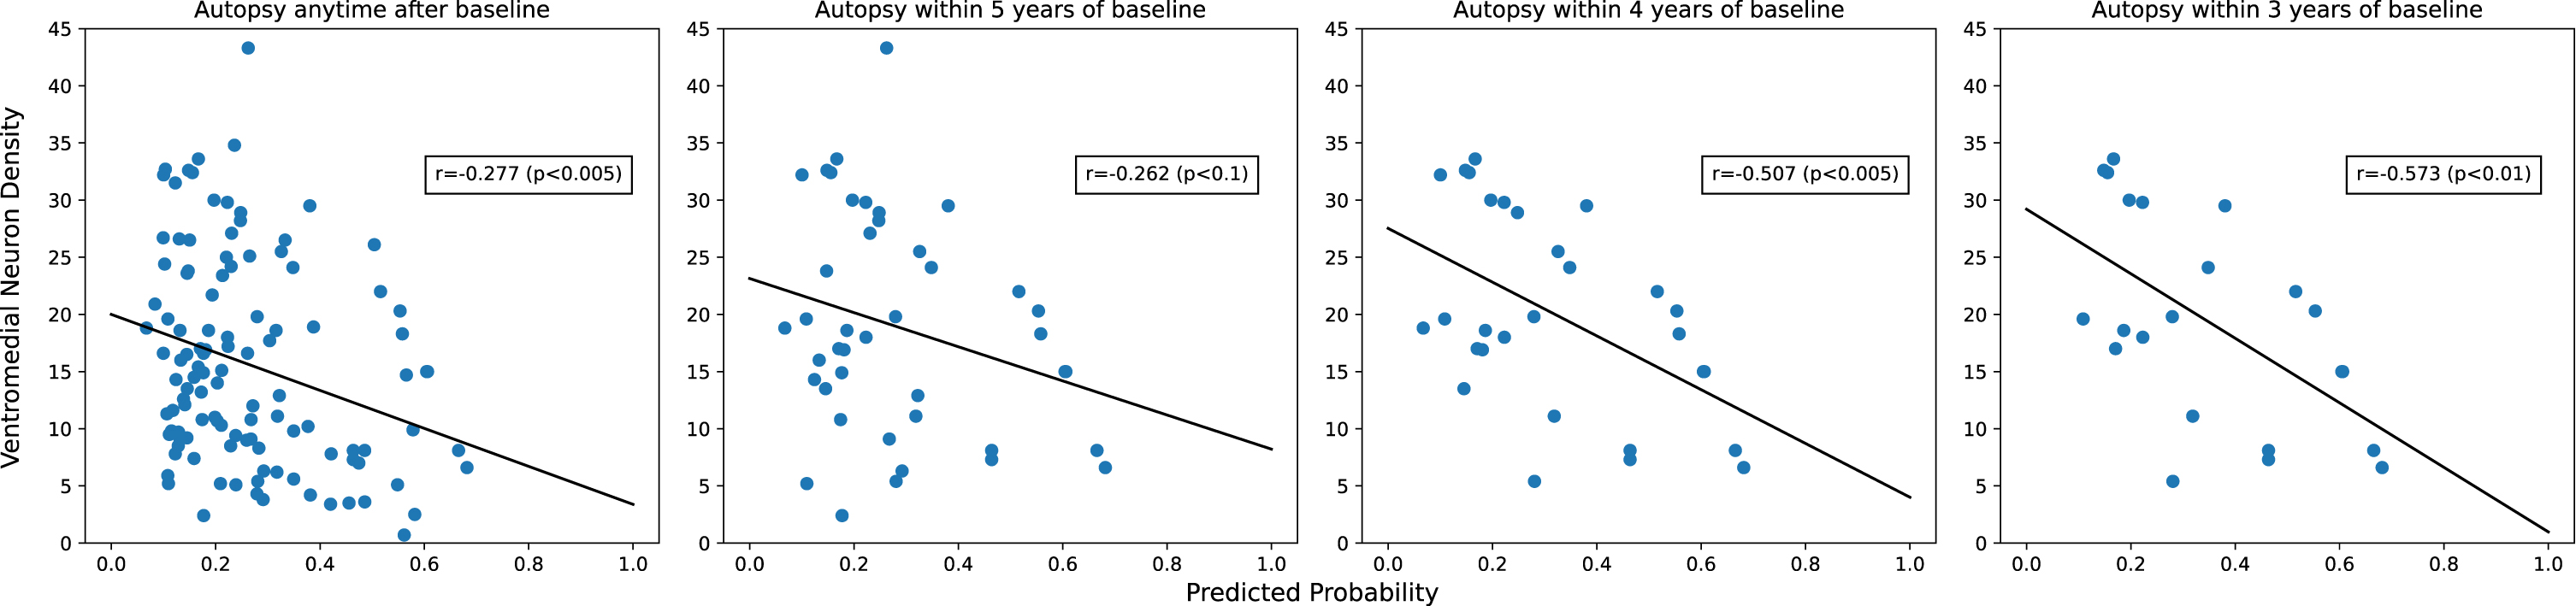 Correlation between predicted PD risk and ventromedial neuron density is stronger closer to index date.